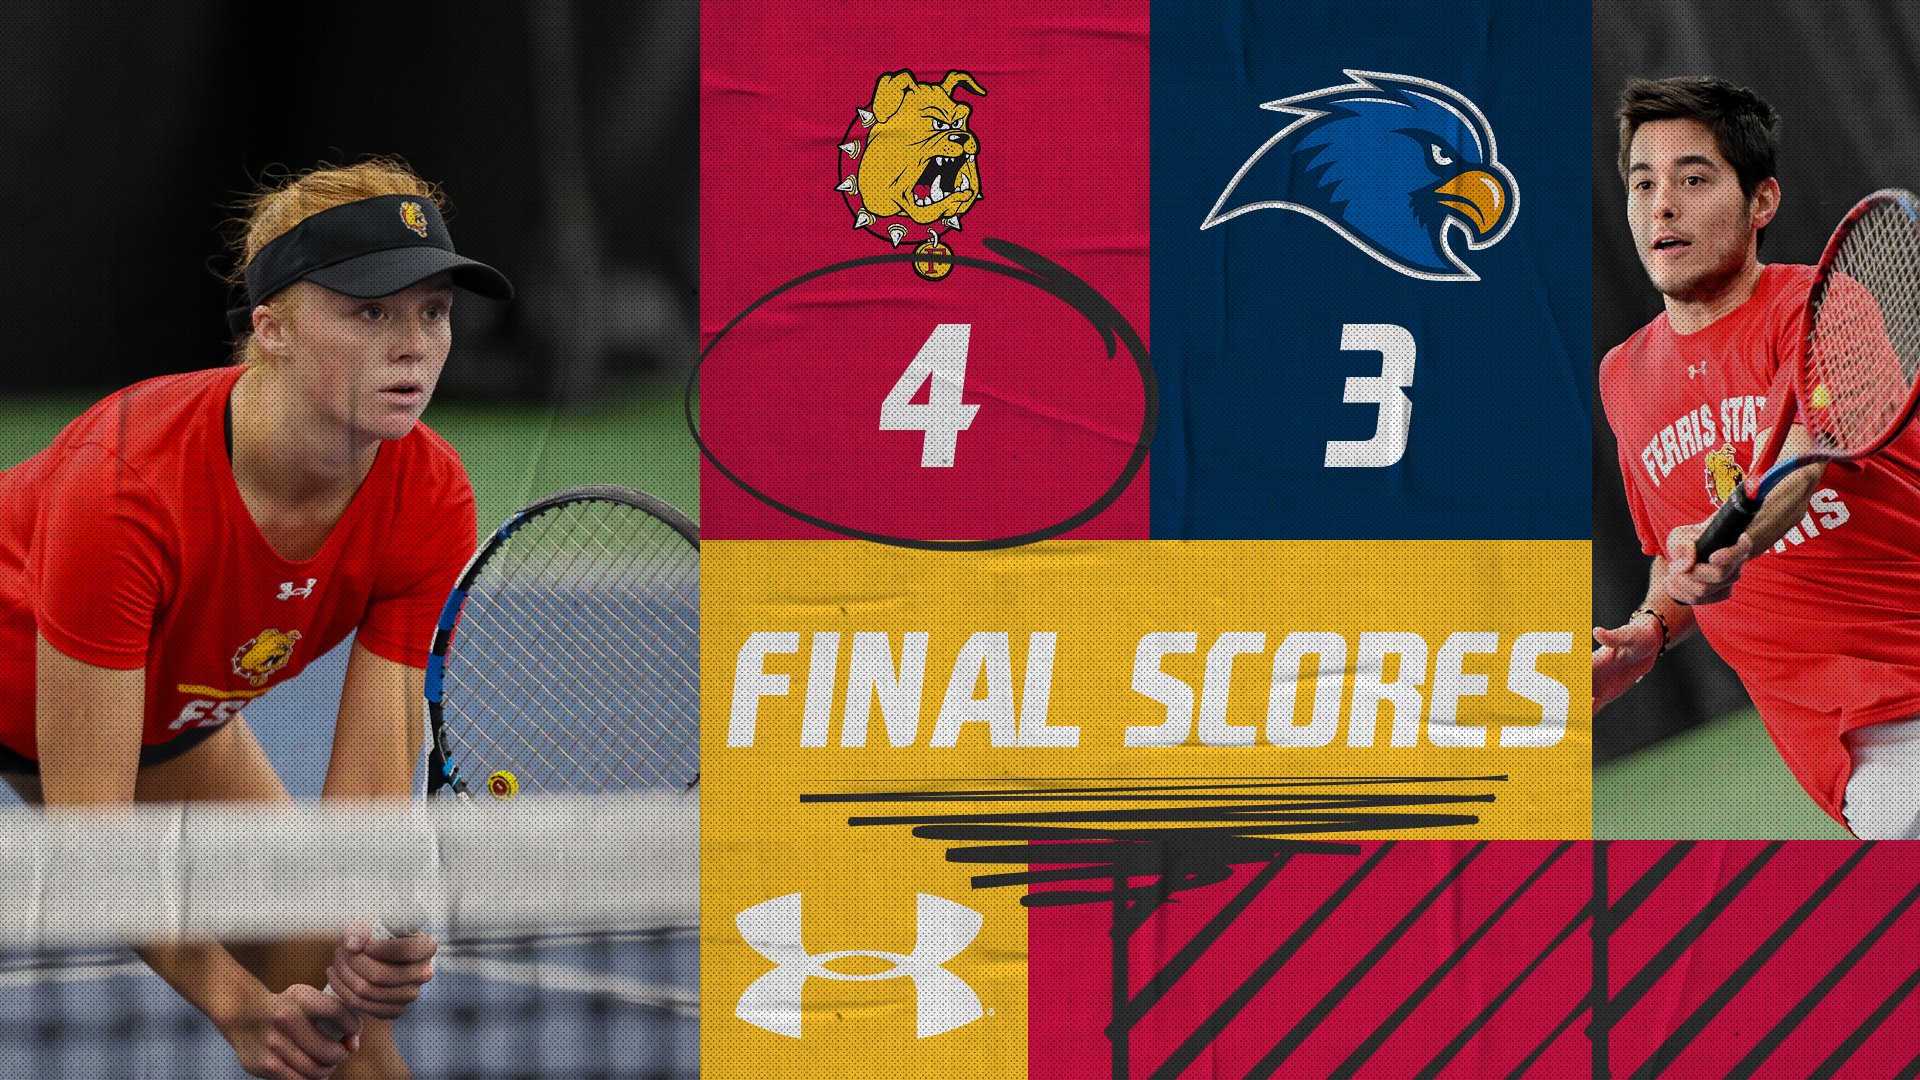 Ferris State Tennis Squads Close Out Florida Trip With Regional Sweep Over Rockhurst